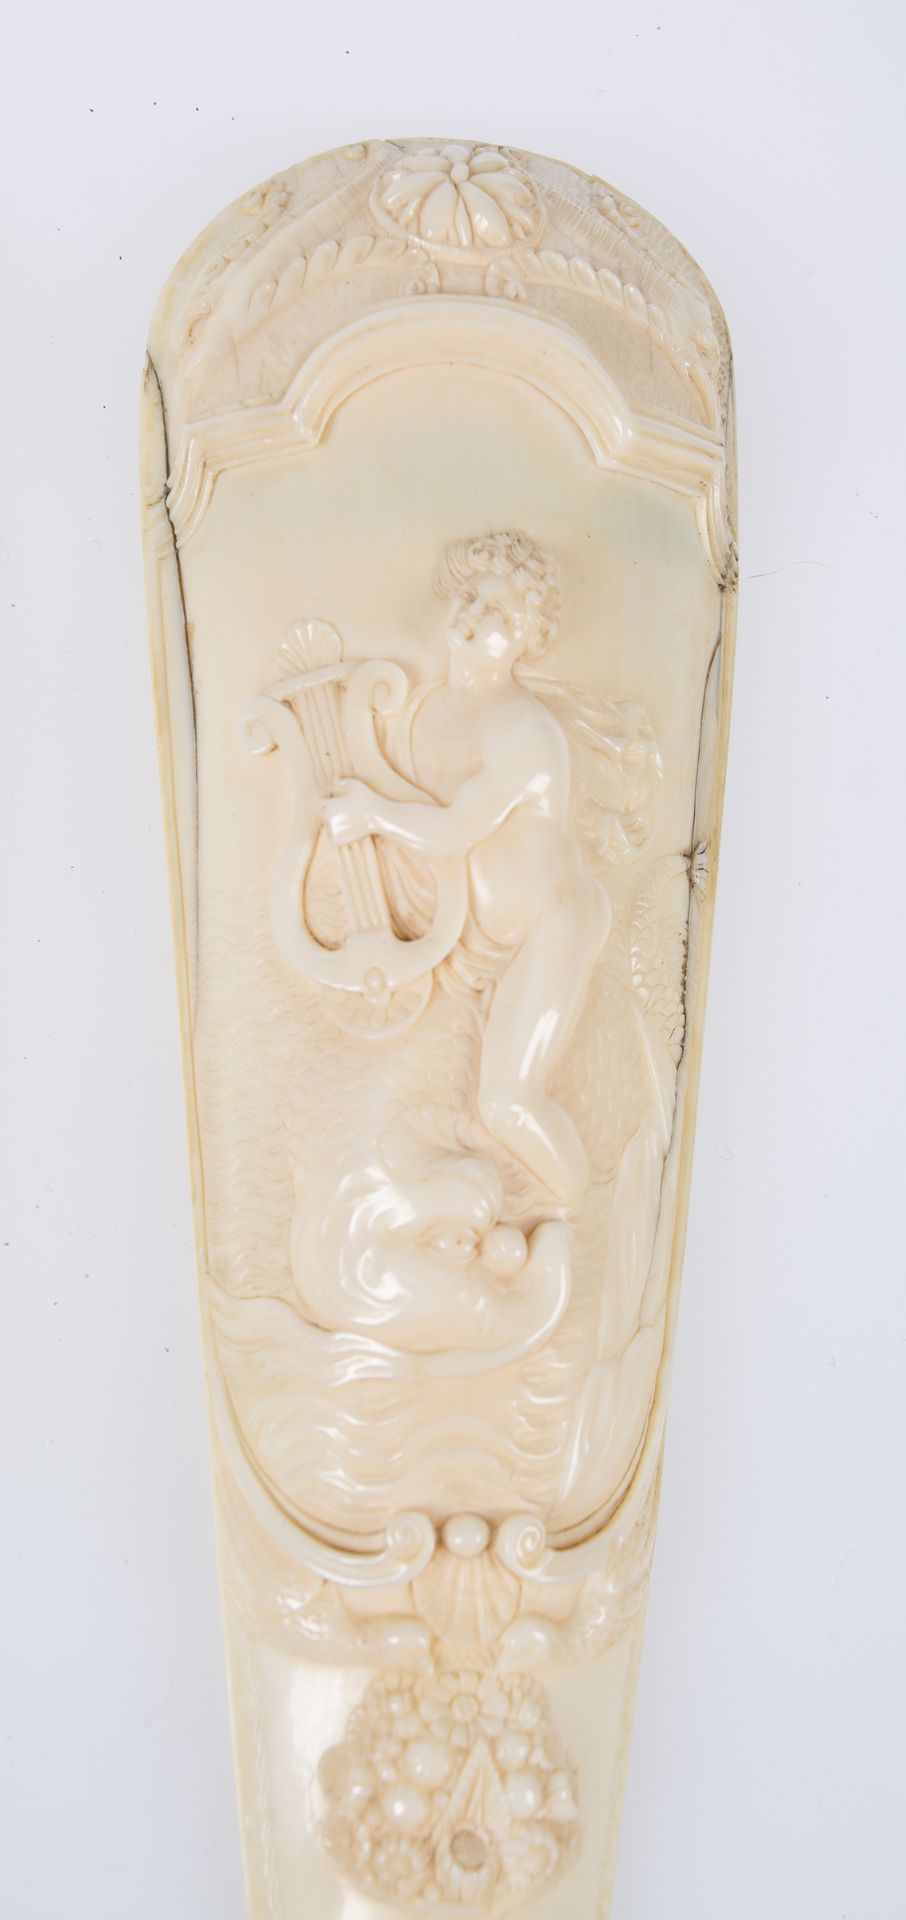 Sculpted ivory snuffbox. The Netherlands. Circa 1720. - Image 2 of 2